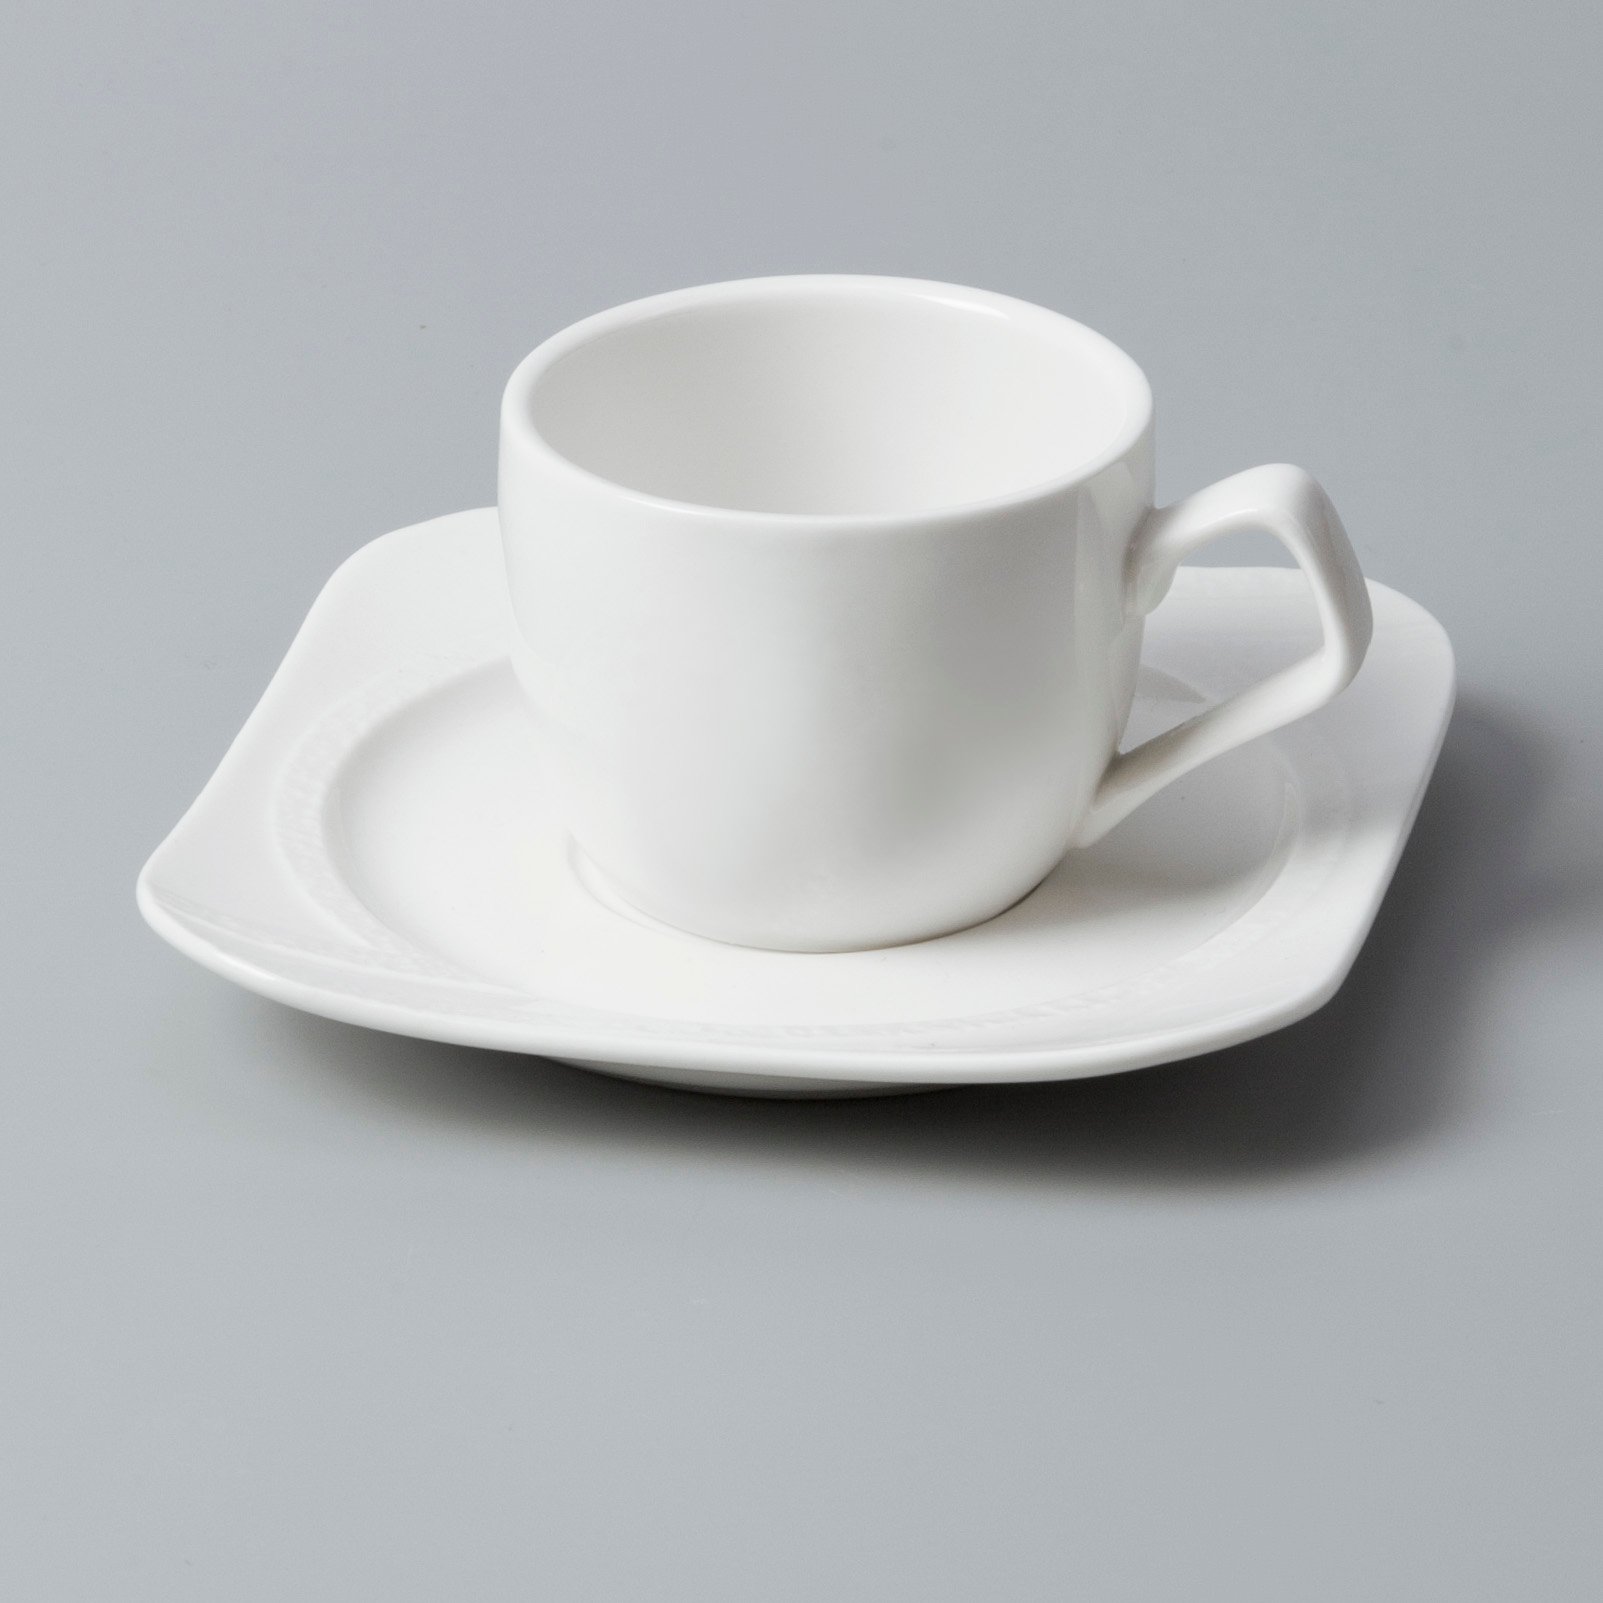 sample hotel crockery online india manufacturer for kitchen Two Eight-7